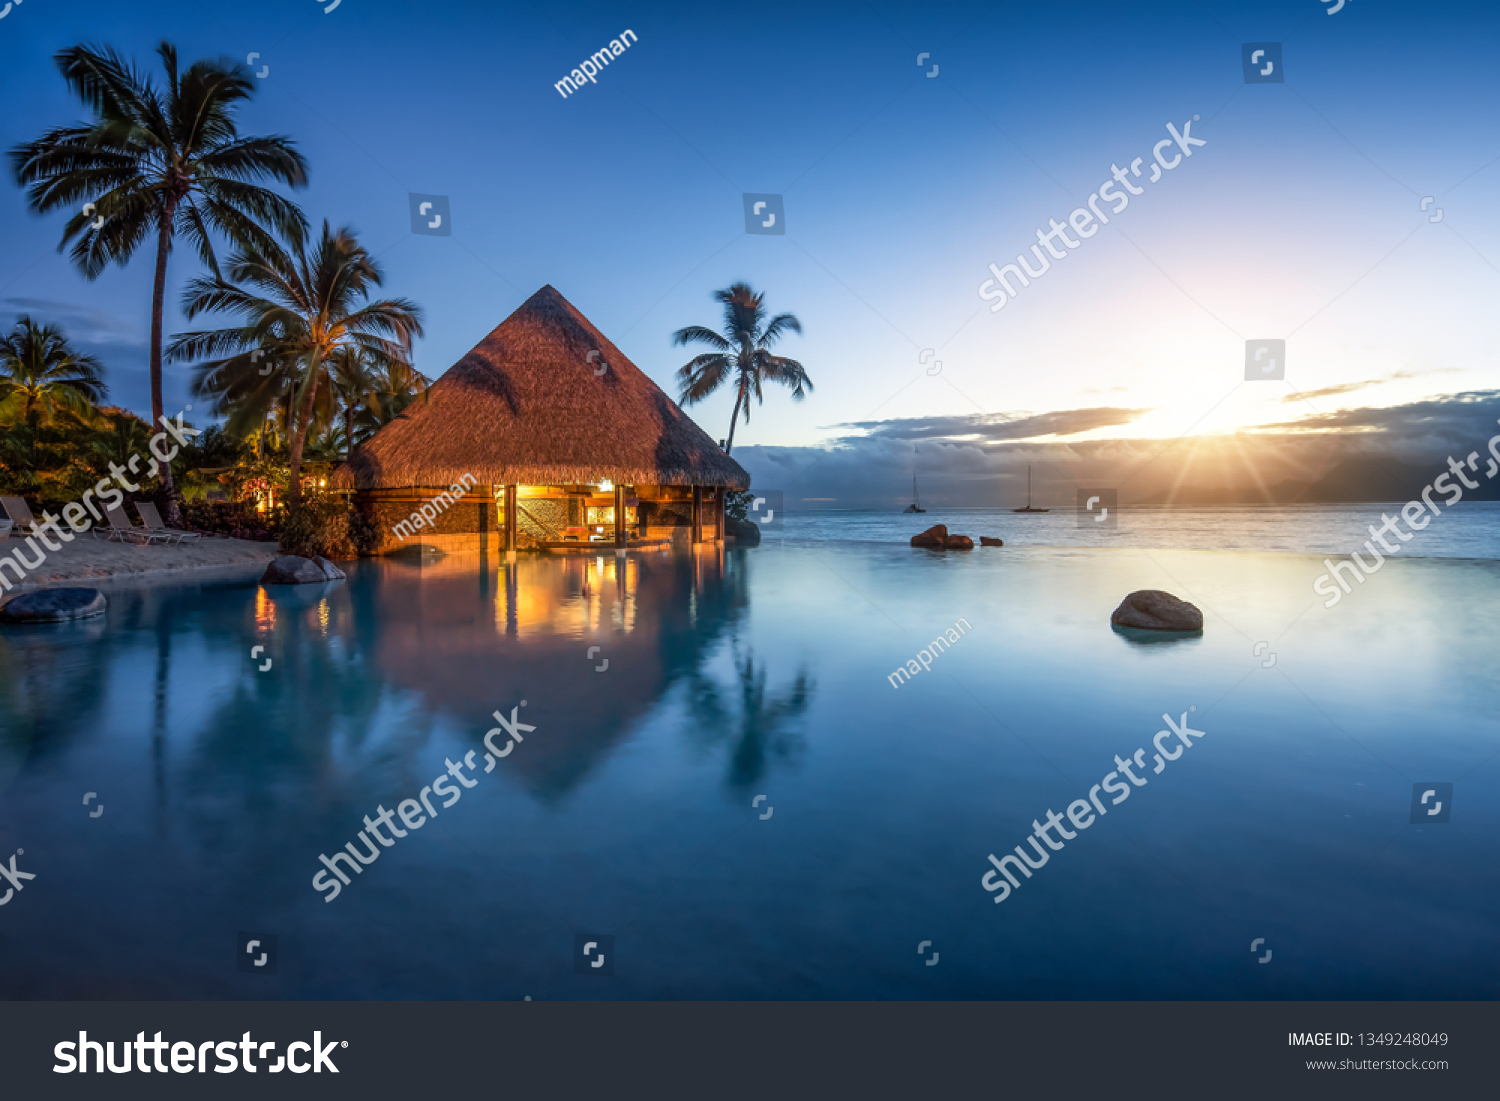 Romantic sunset at a luxury hotel with infinity pool #1349248049